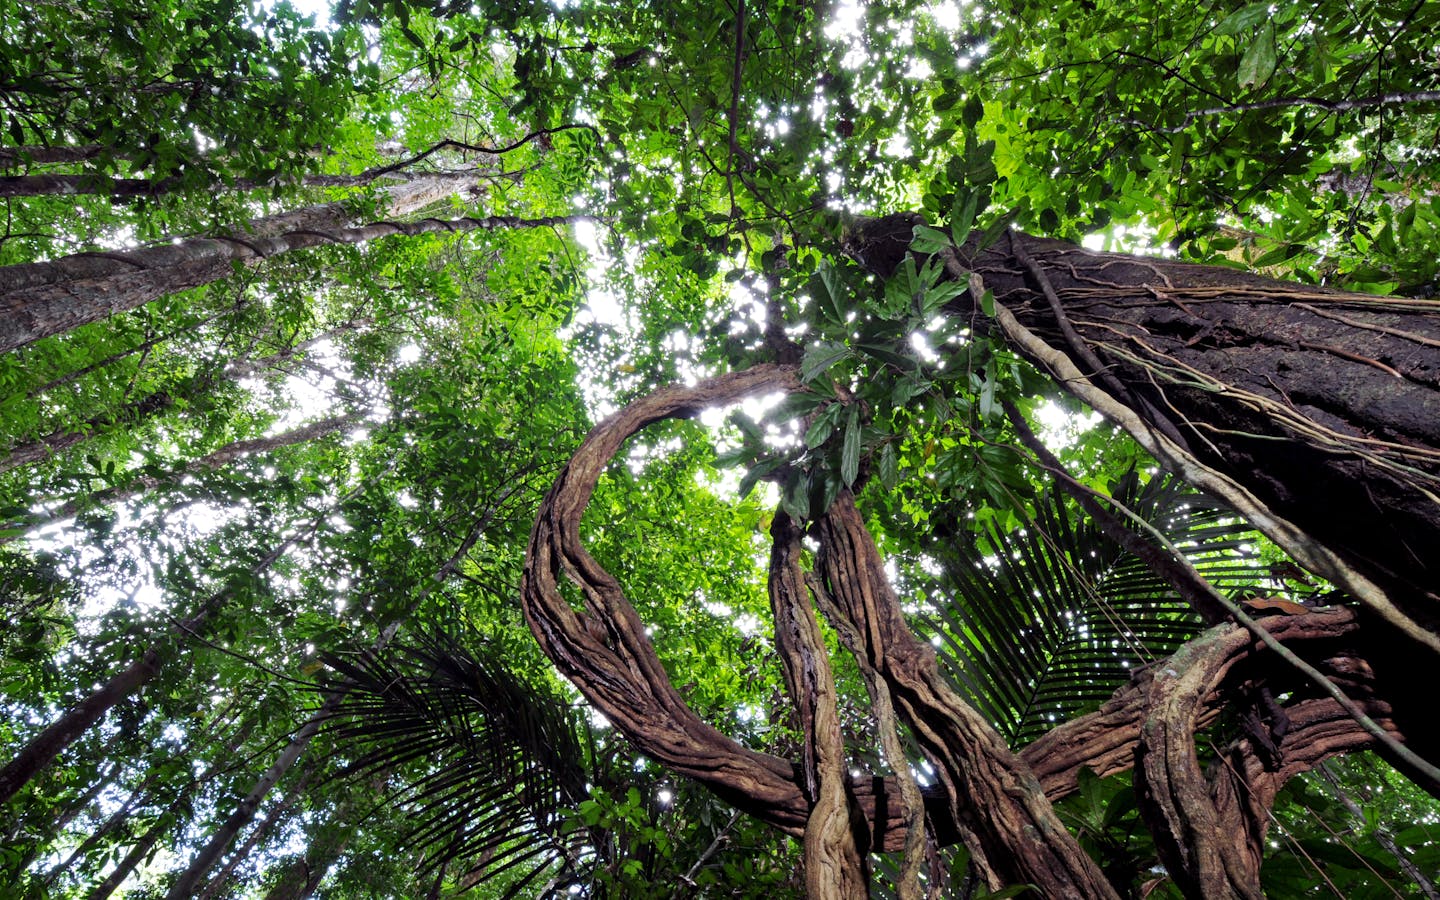 Looking up at the canopy in the Amapá State Forest, Brazil